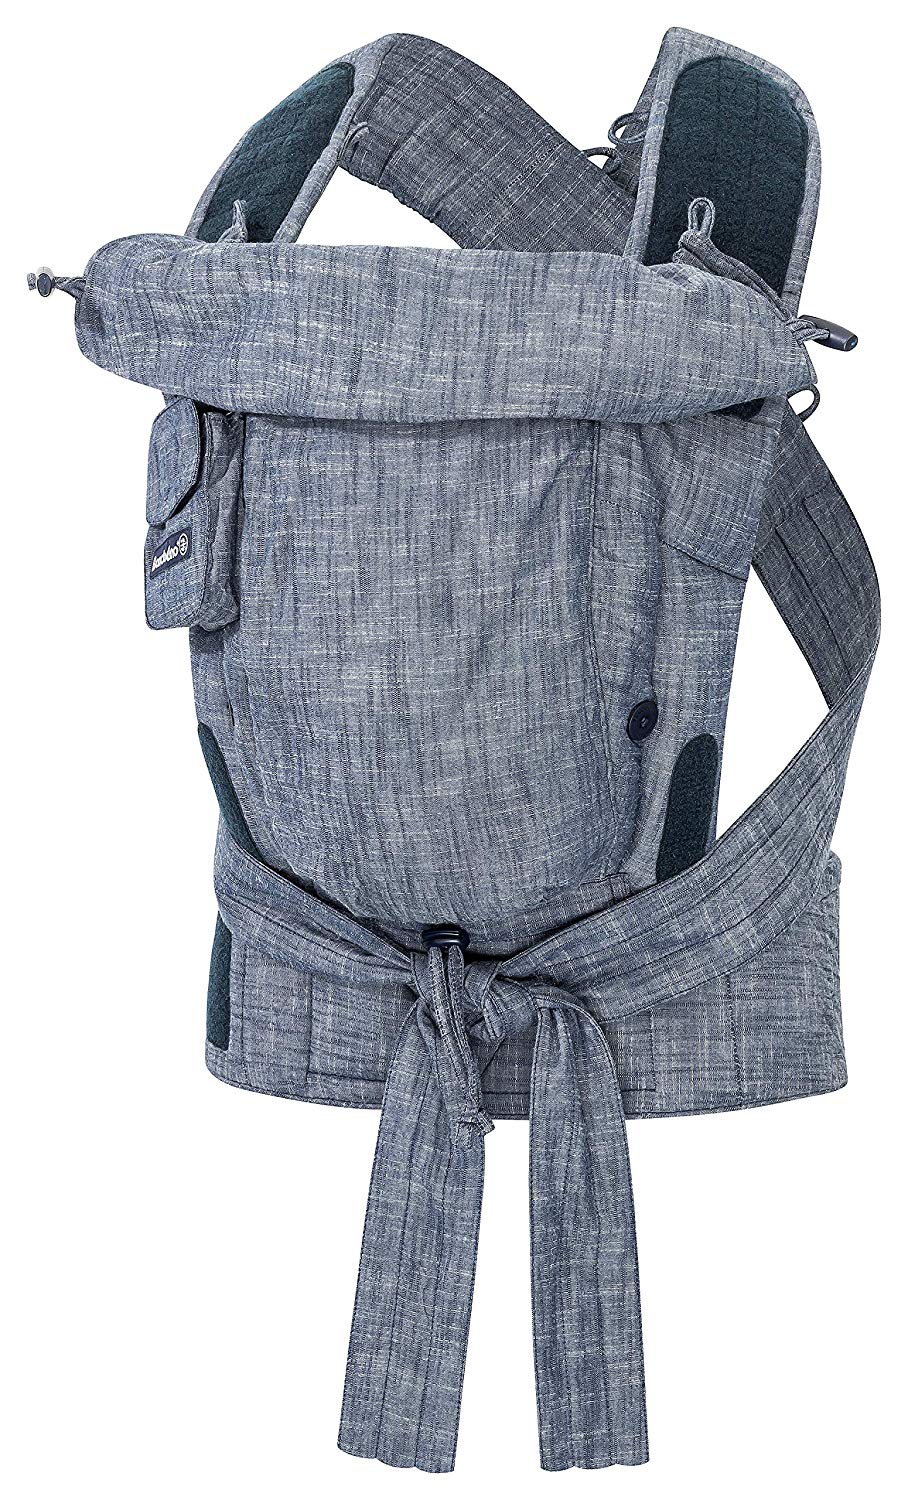 Bondolino Plus Baby Carrier With Tying Instructions